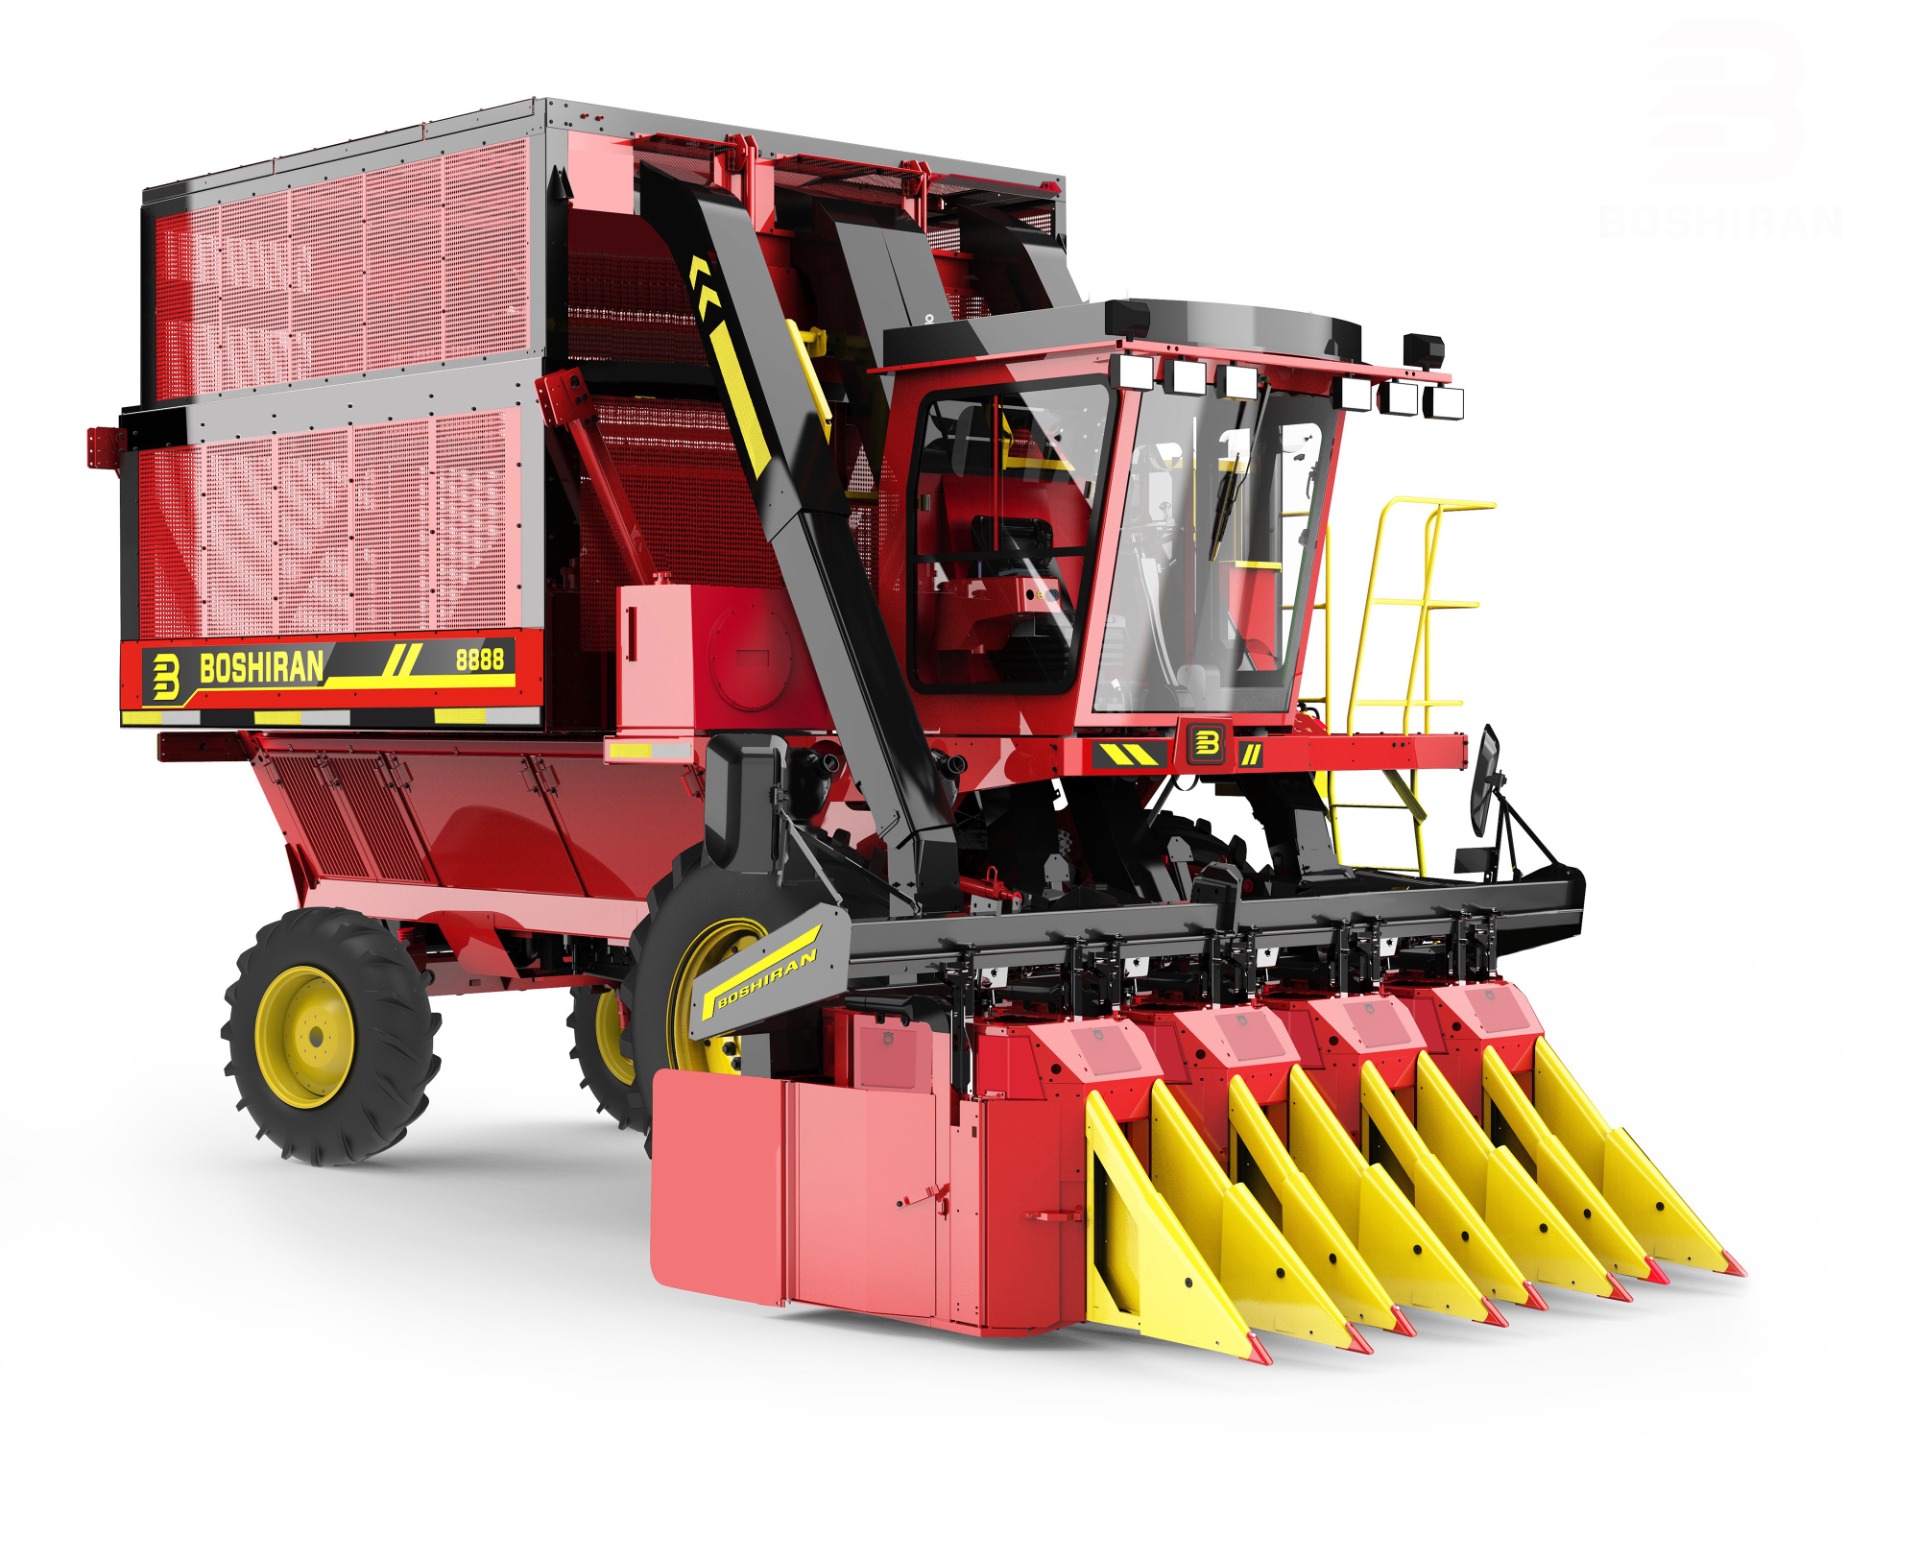 4MZ-4A Cotton Picker with Basket